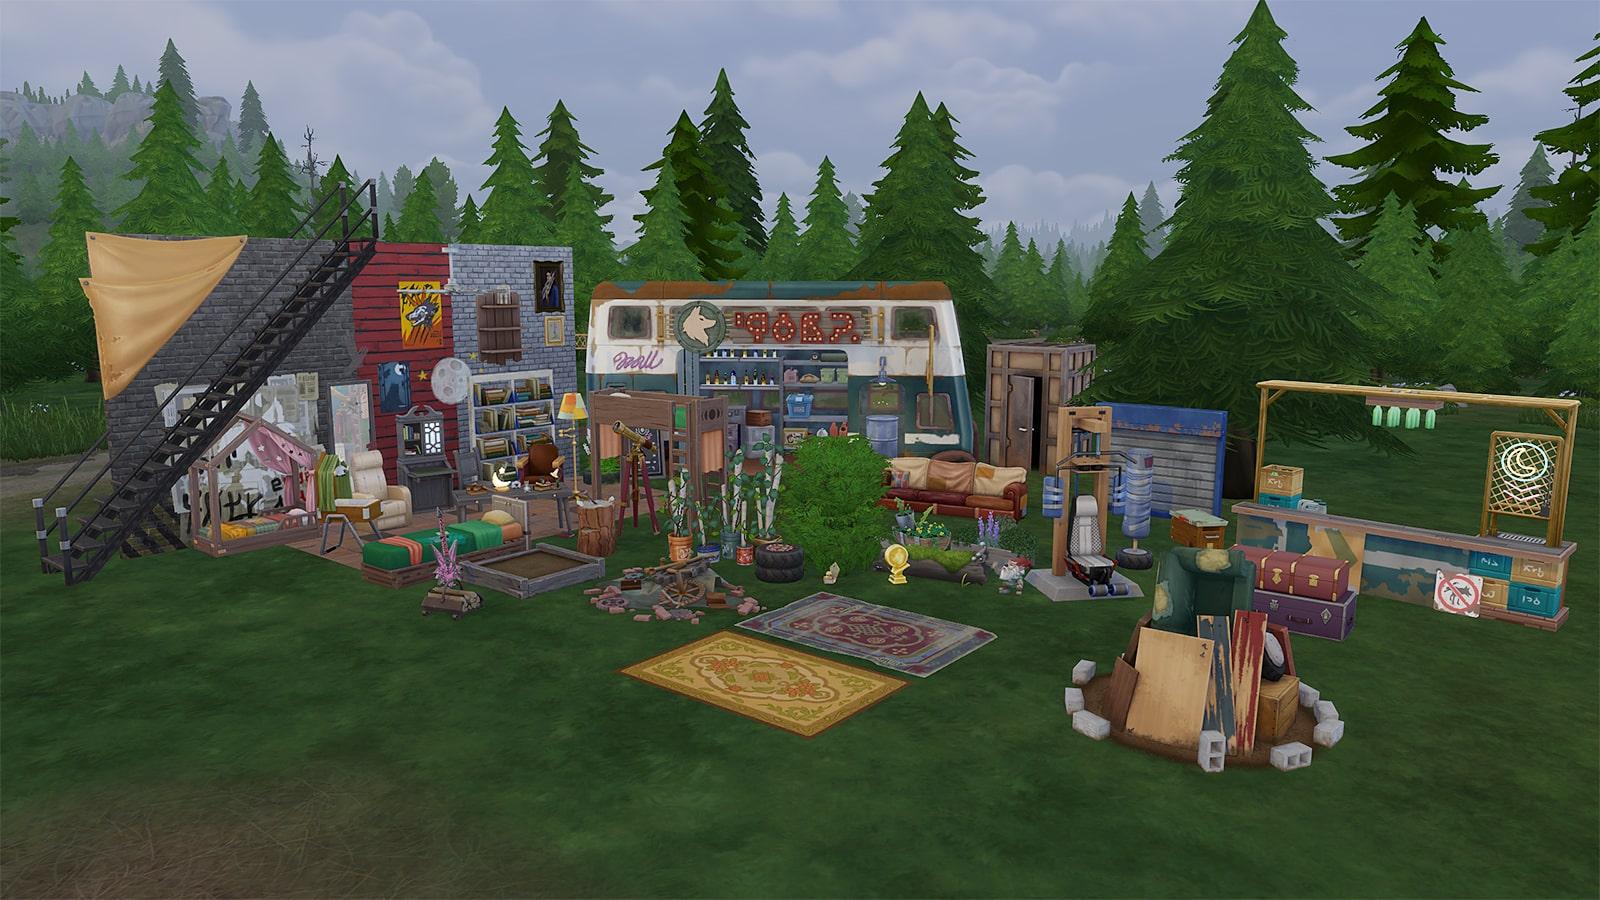 The Build/Buy items in The Sims 4 Werewolves